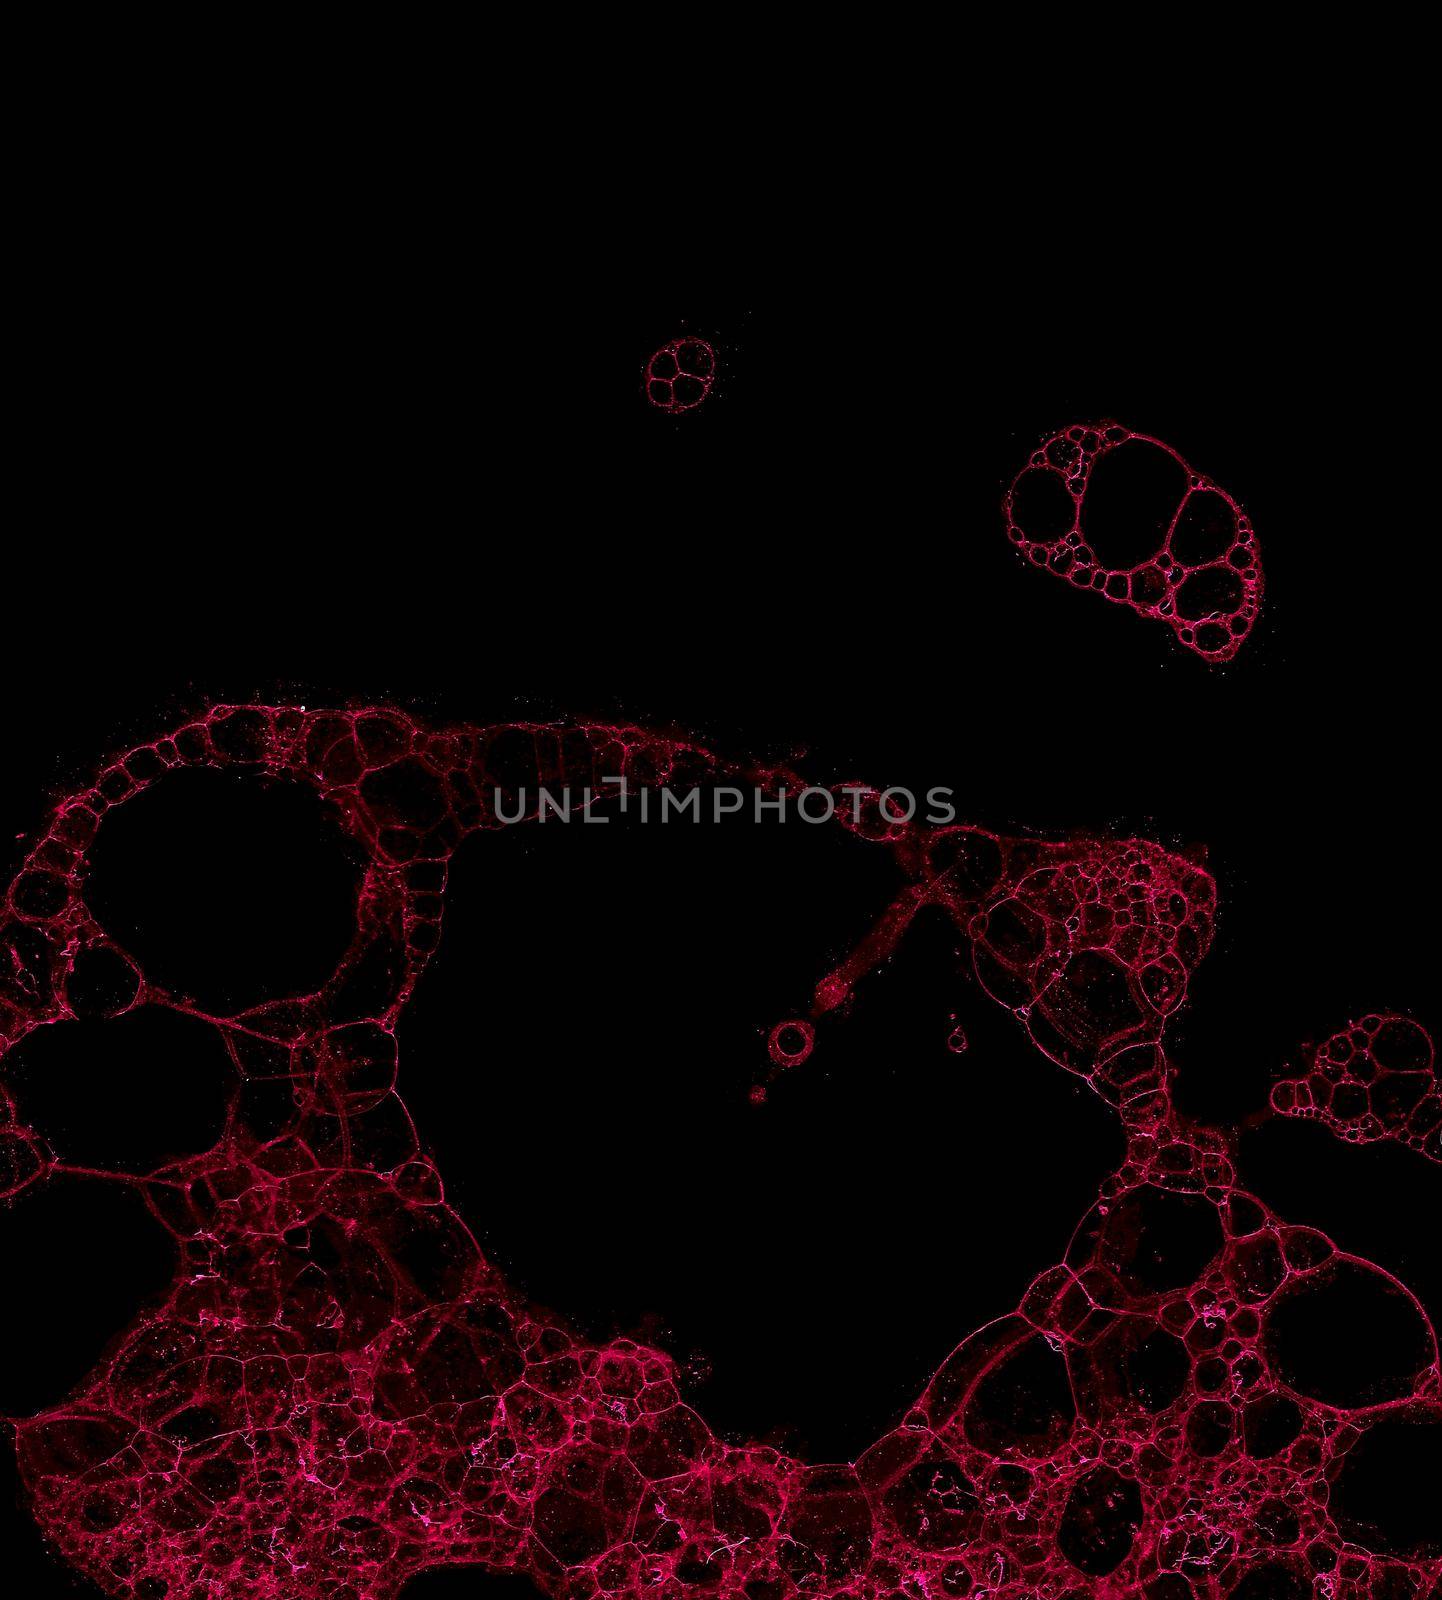 Abstract grunge cellular background by Lirch